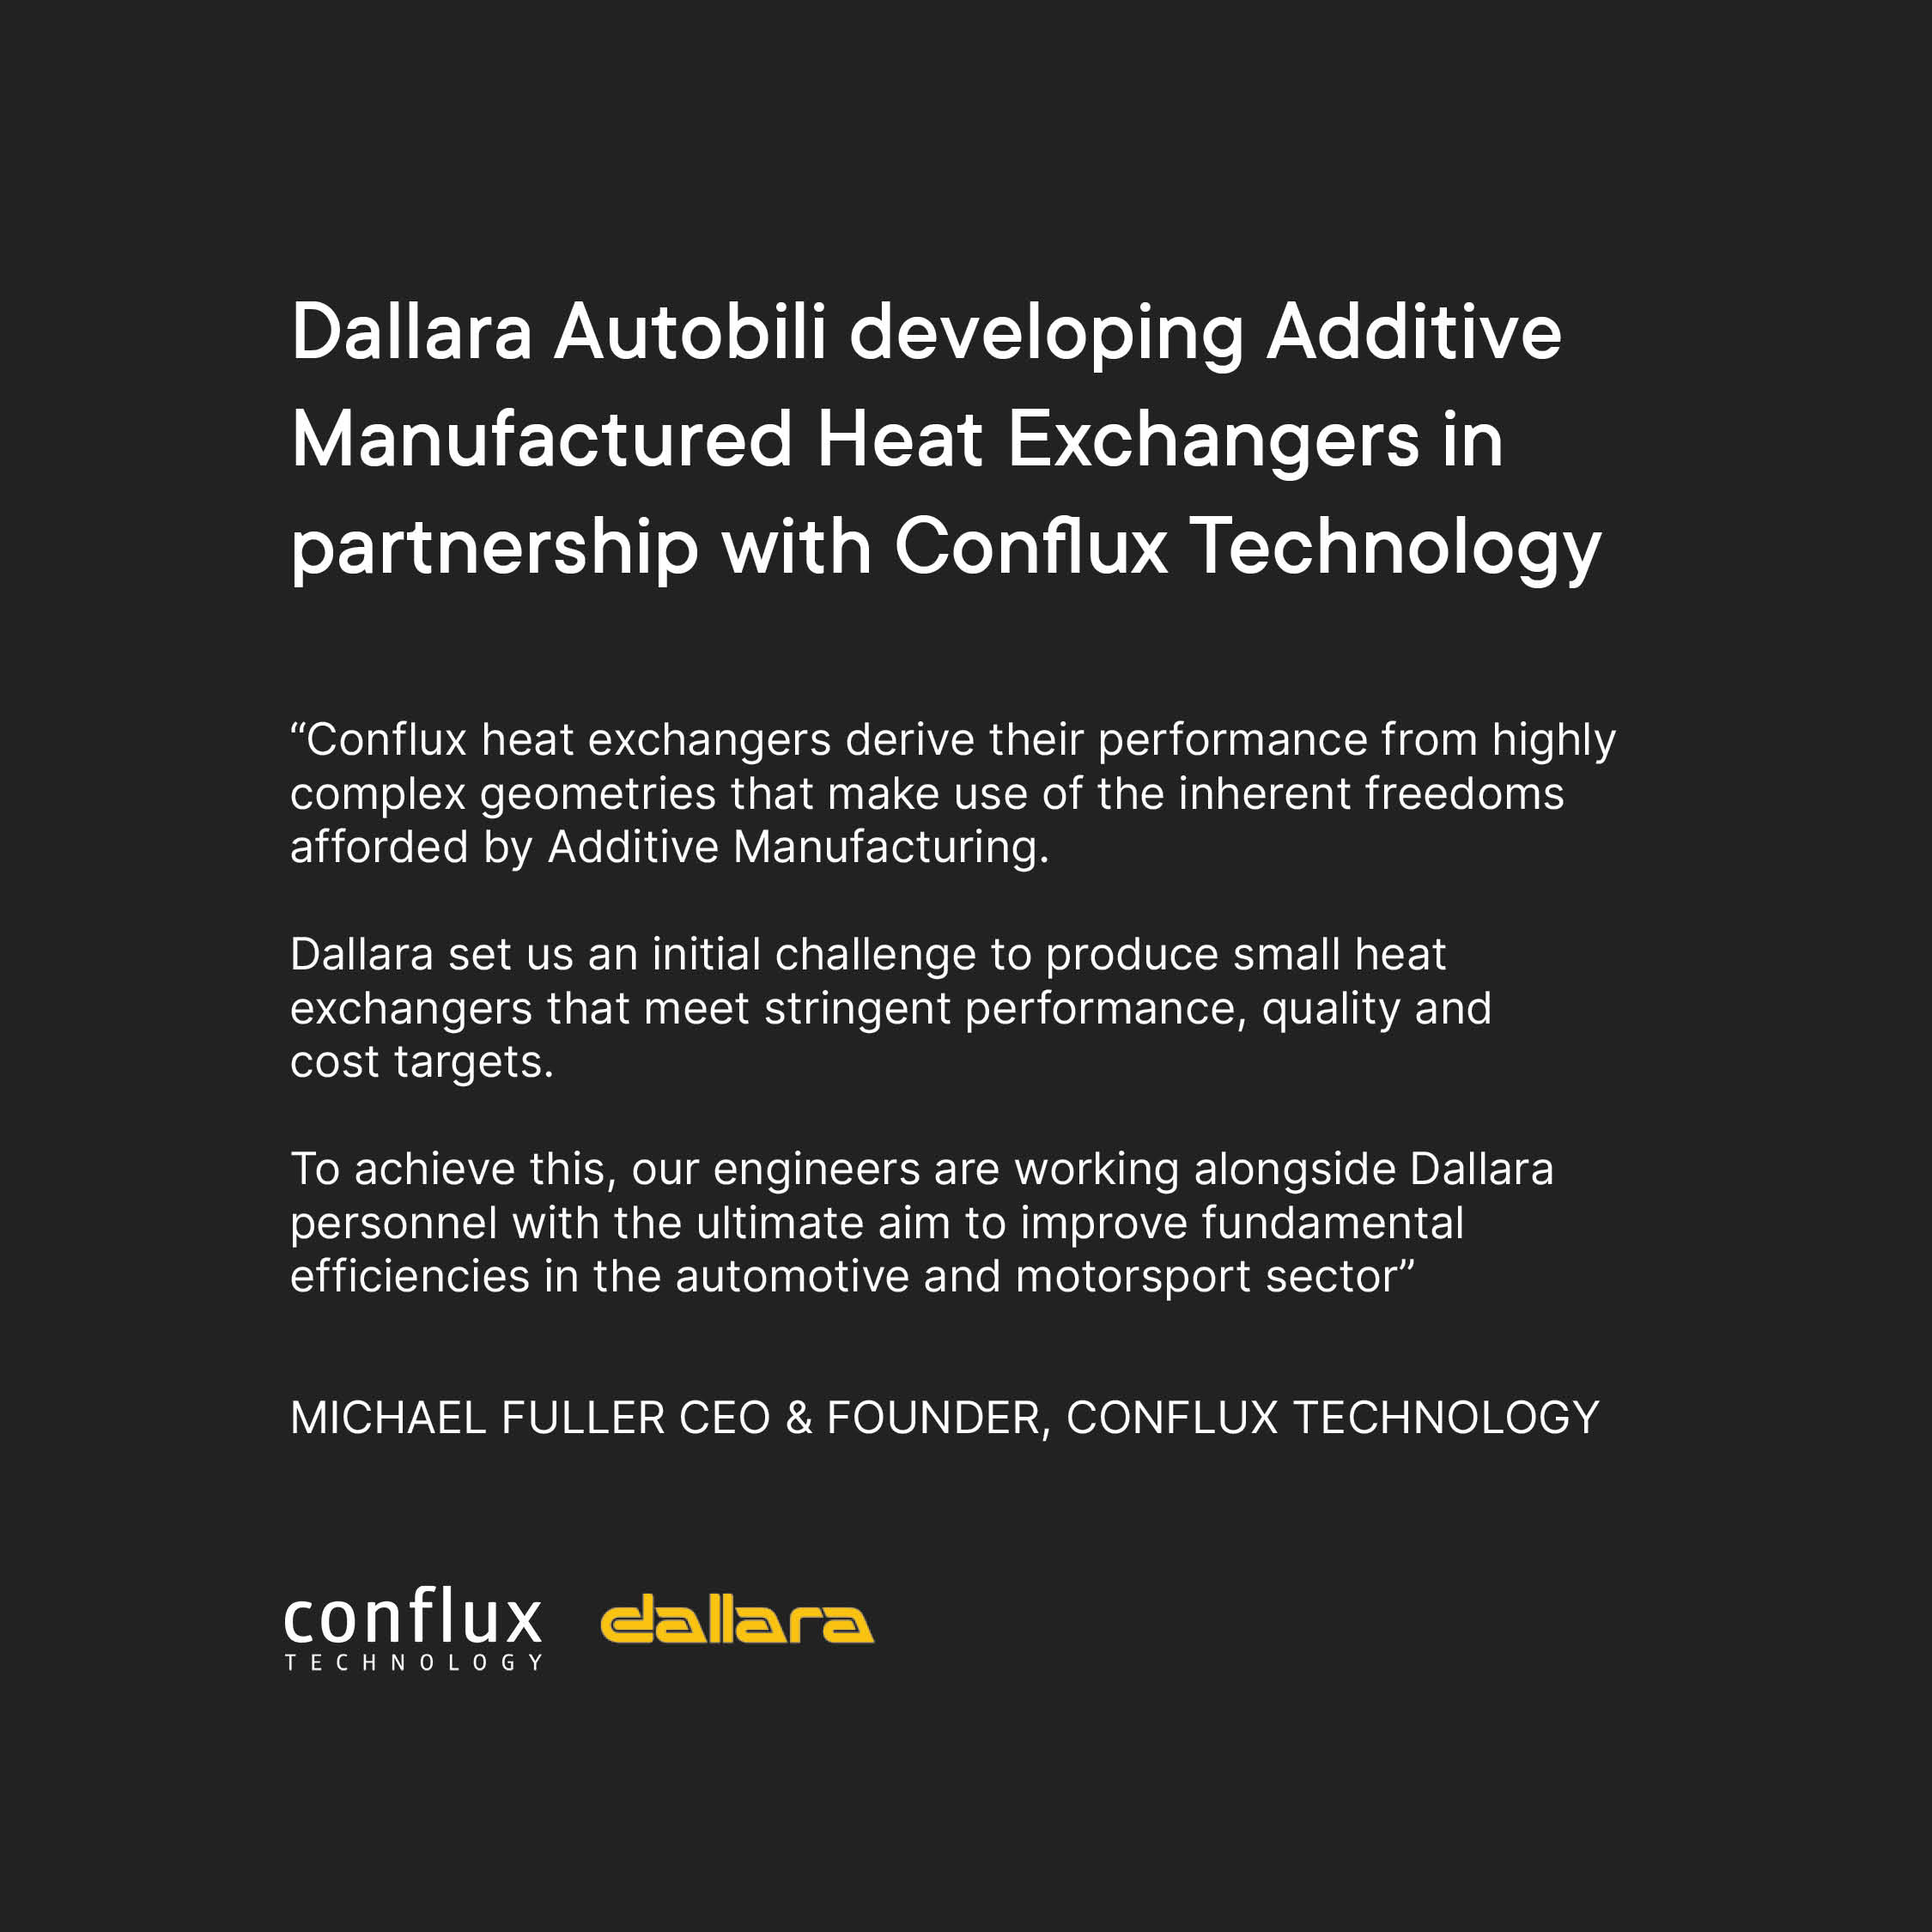 Dallara developing Additive Manufactured Heat Exchangers in partnership with Conflux Technology